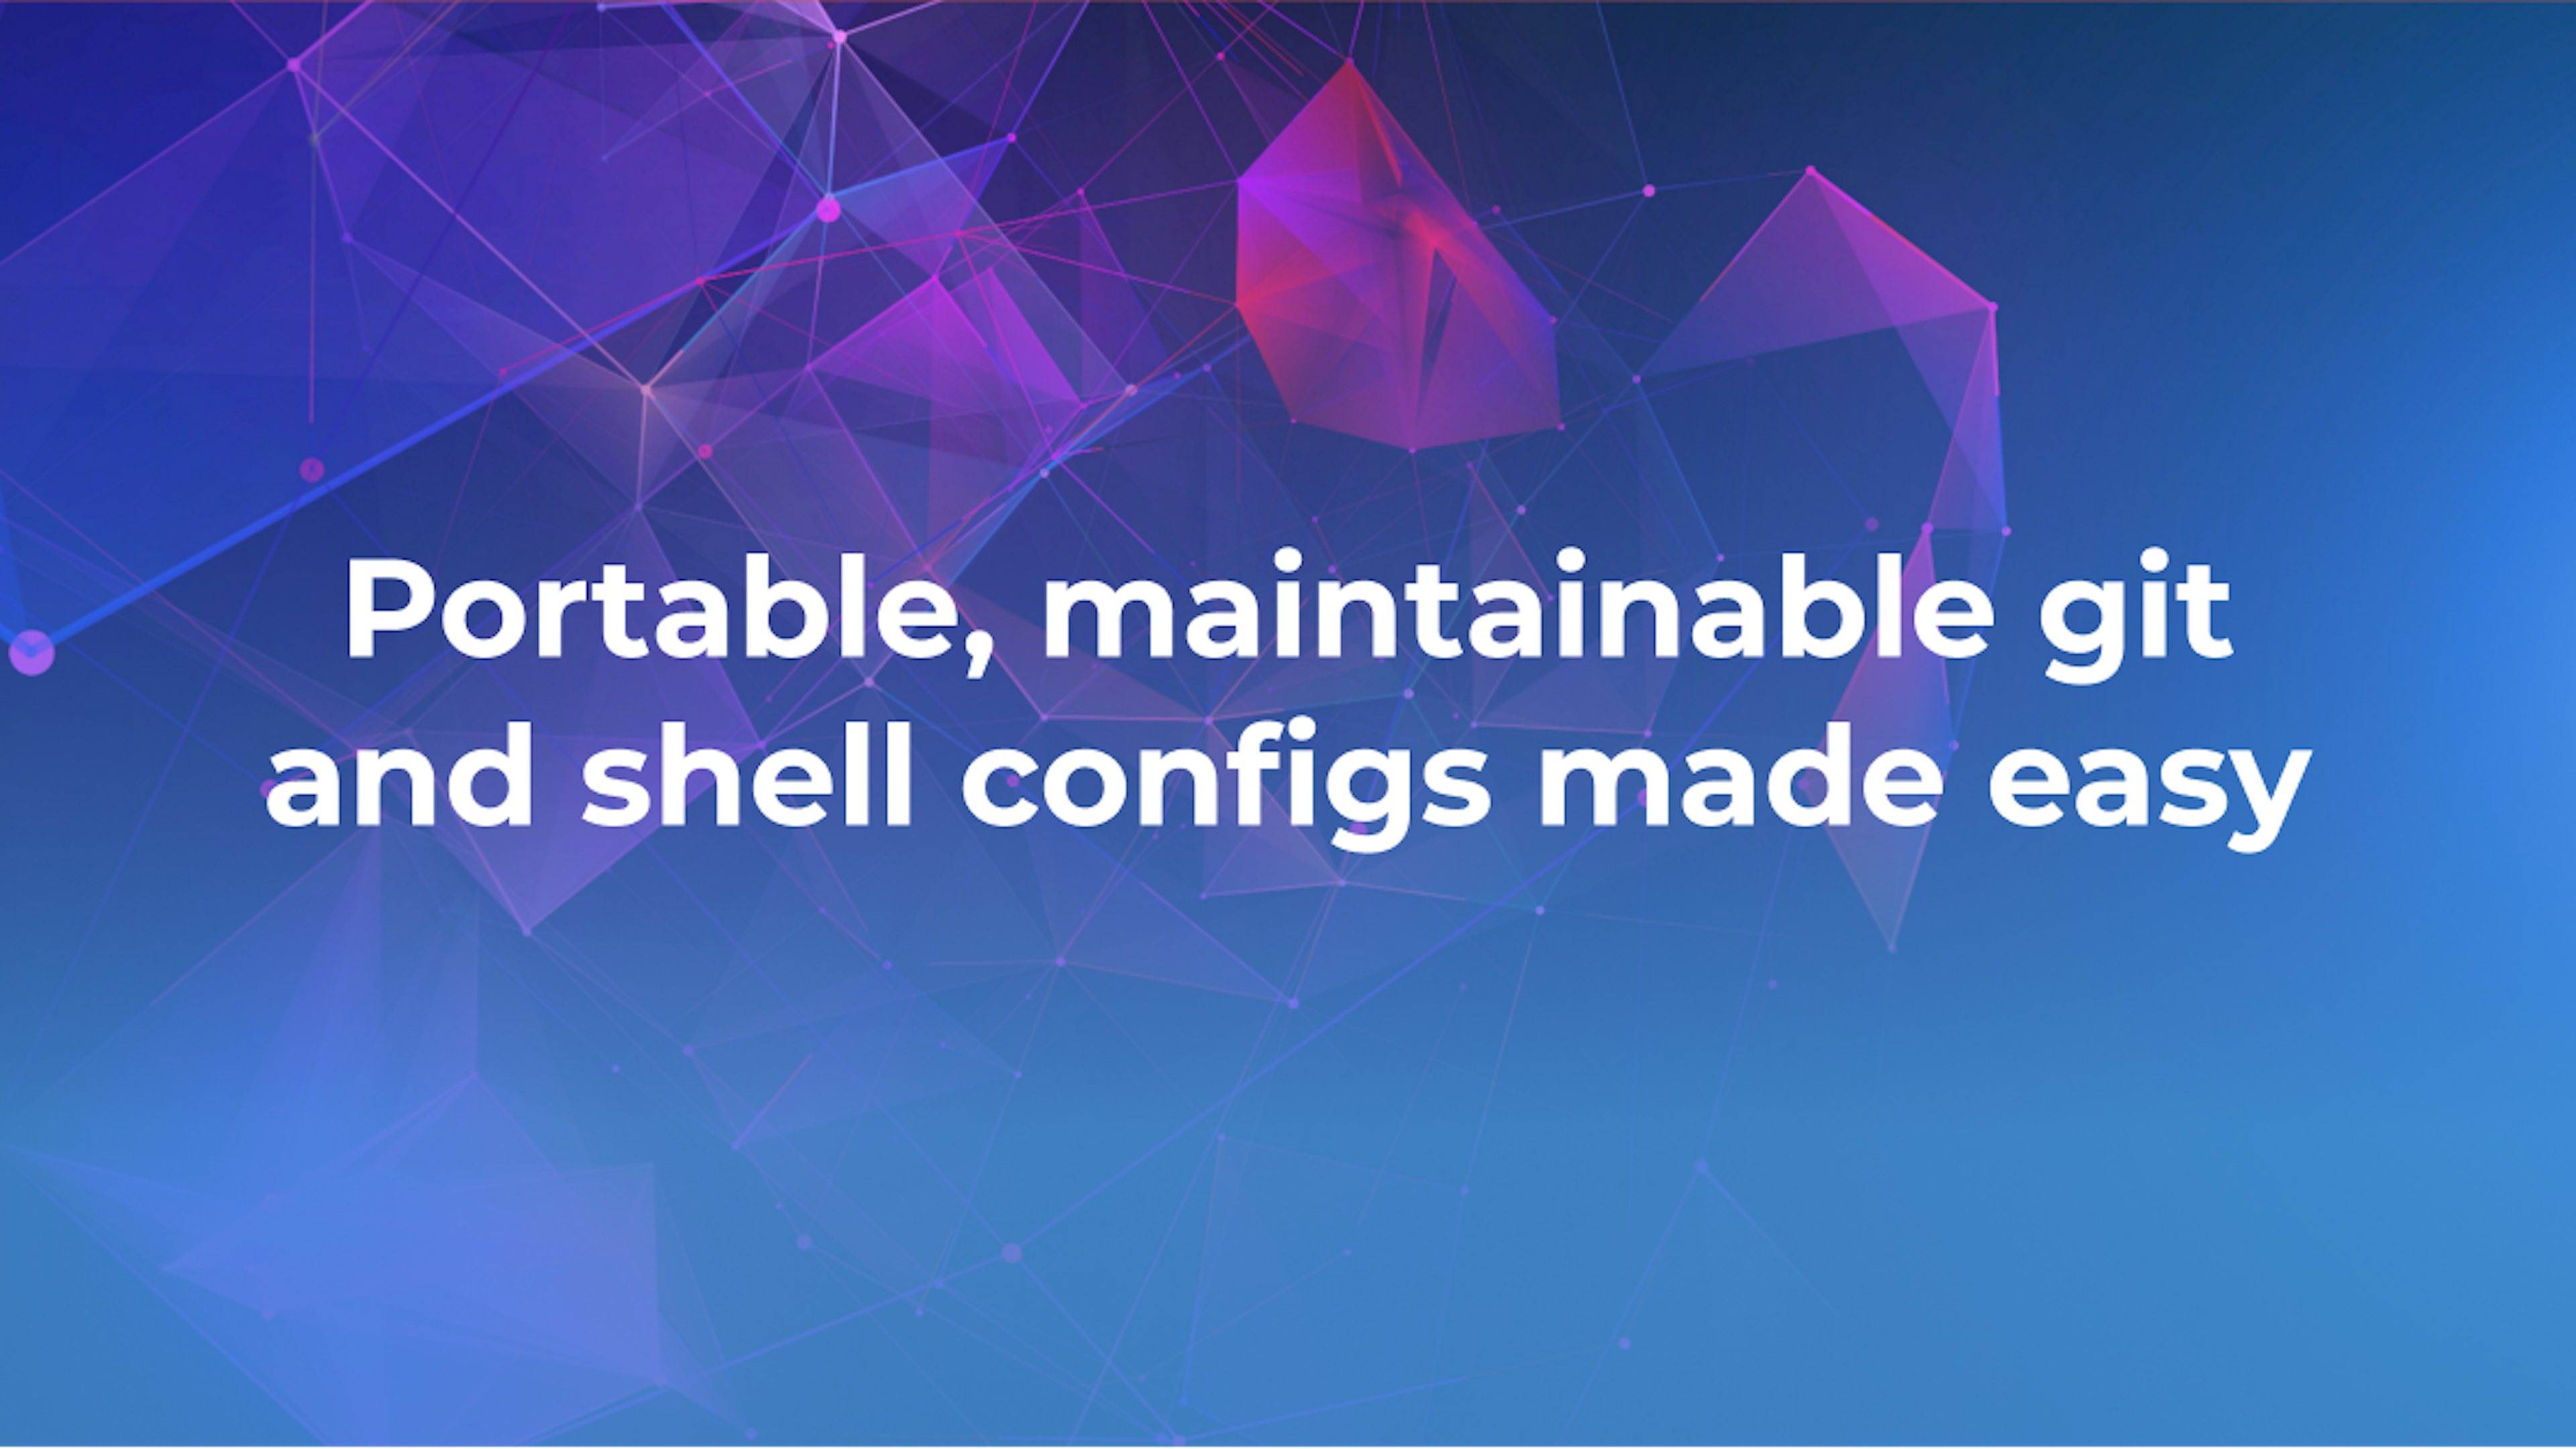 How-To: portable, maintainable git and shell configs made easy